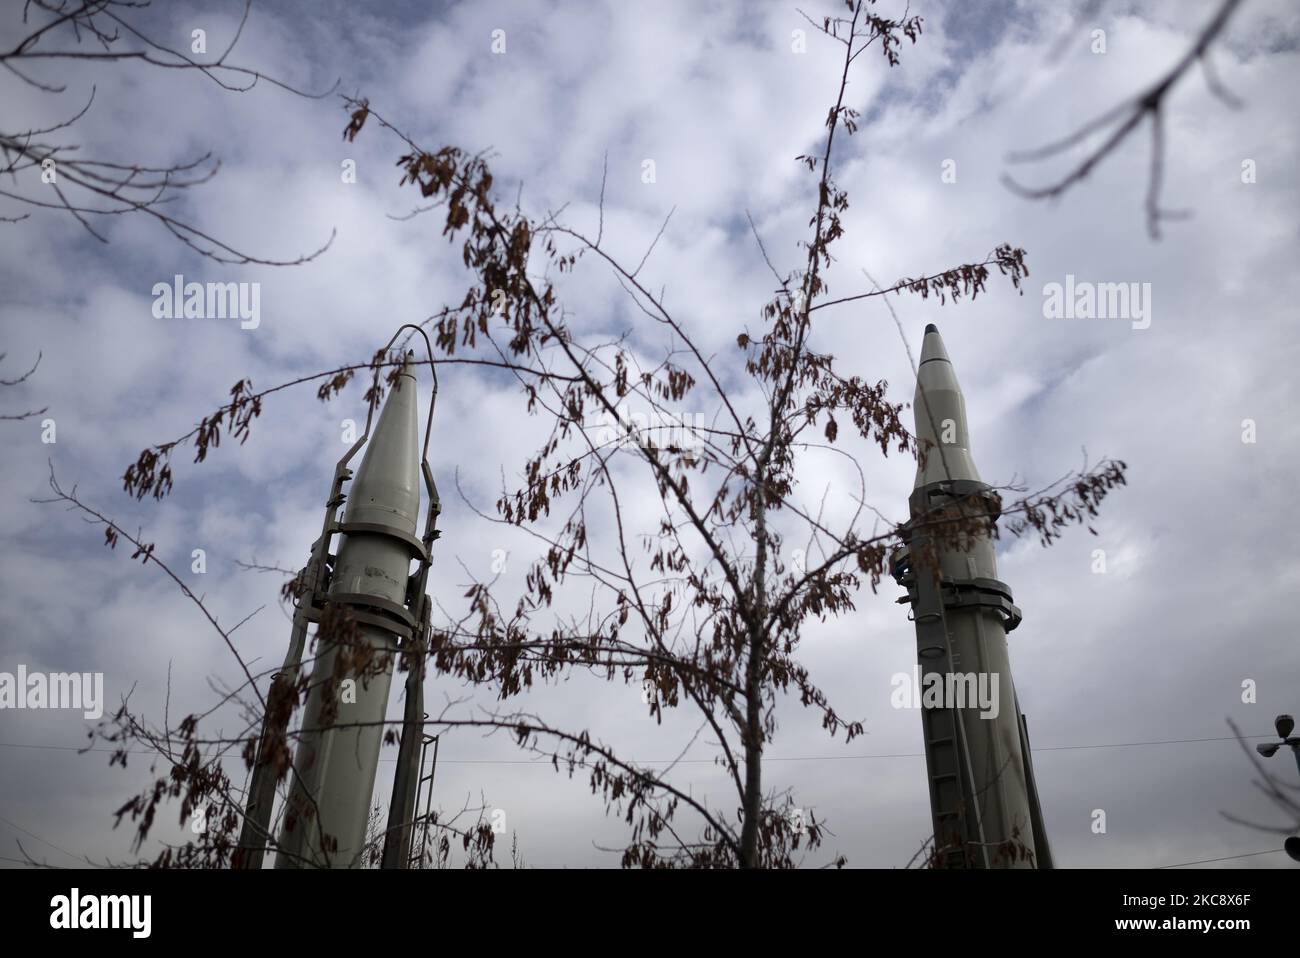 File Photo shows, Iranian surface-to-surface missiles, Shahab-1 (L) and Qiam are displayed at the Defensive Achievements Exhibition of the 40th anniversary of the Islamic Revolution in Imam Khomeini Grand Mosque in central Tehran on the second day of ten-day celebration of Islamic Revolution anniversary, February 2, 2019. (Photo by Morteza Nikoubazl/NurPhoto) Stock Photo